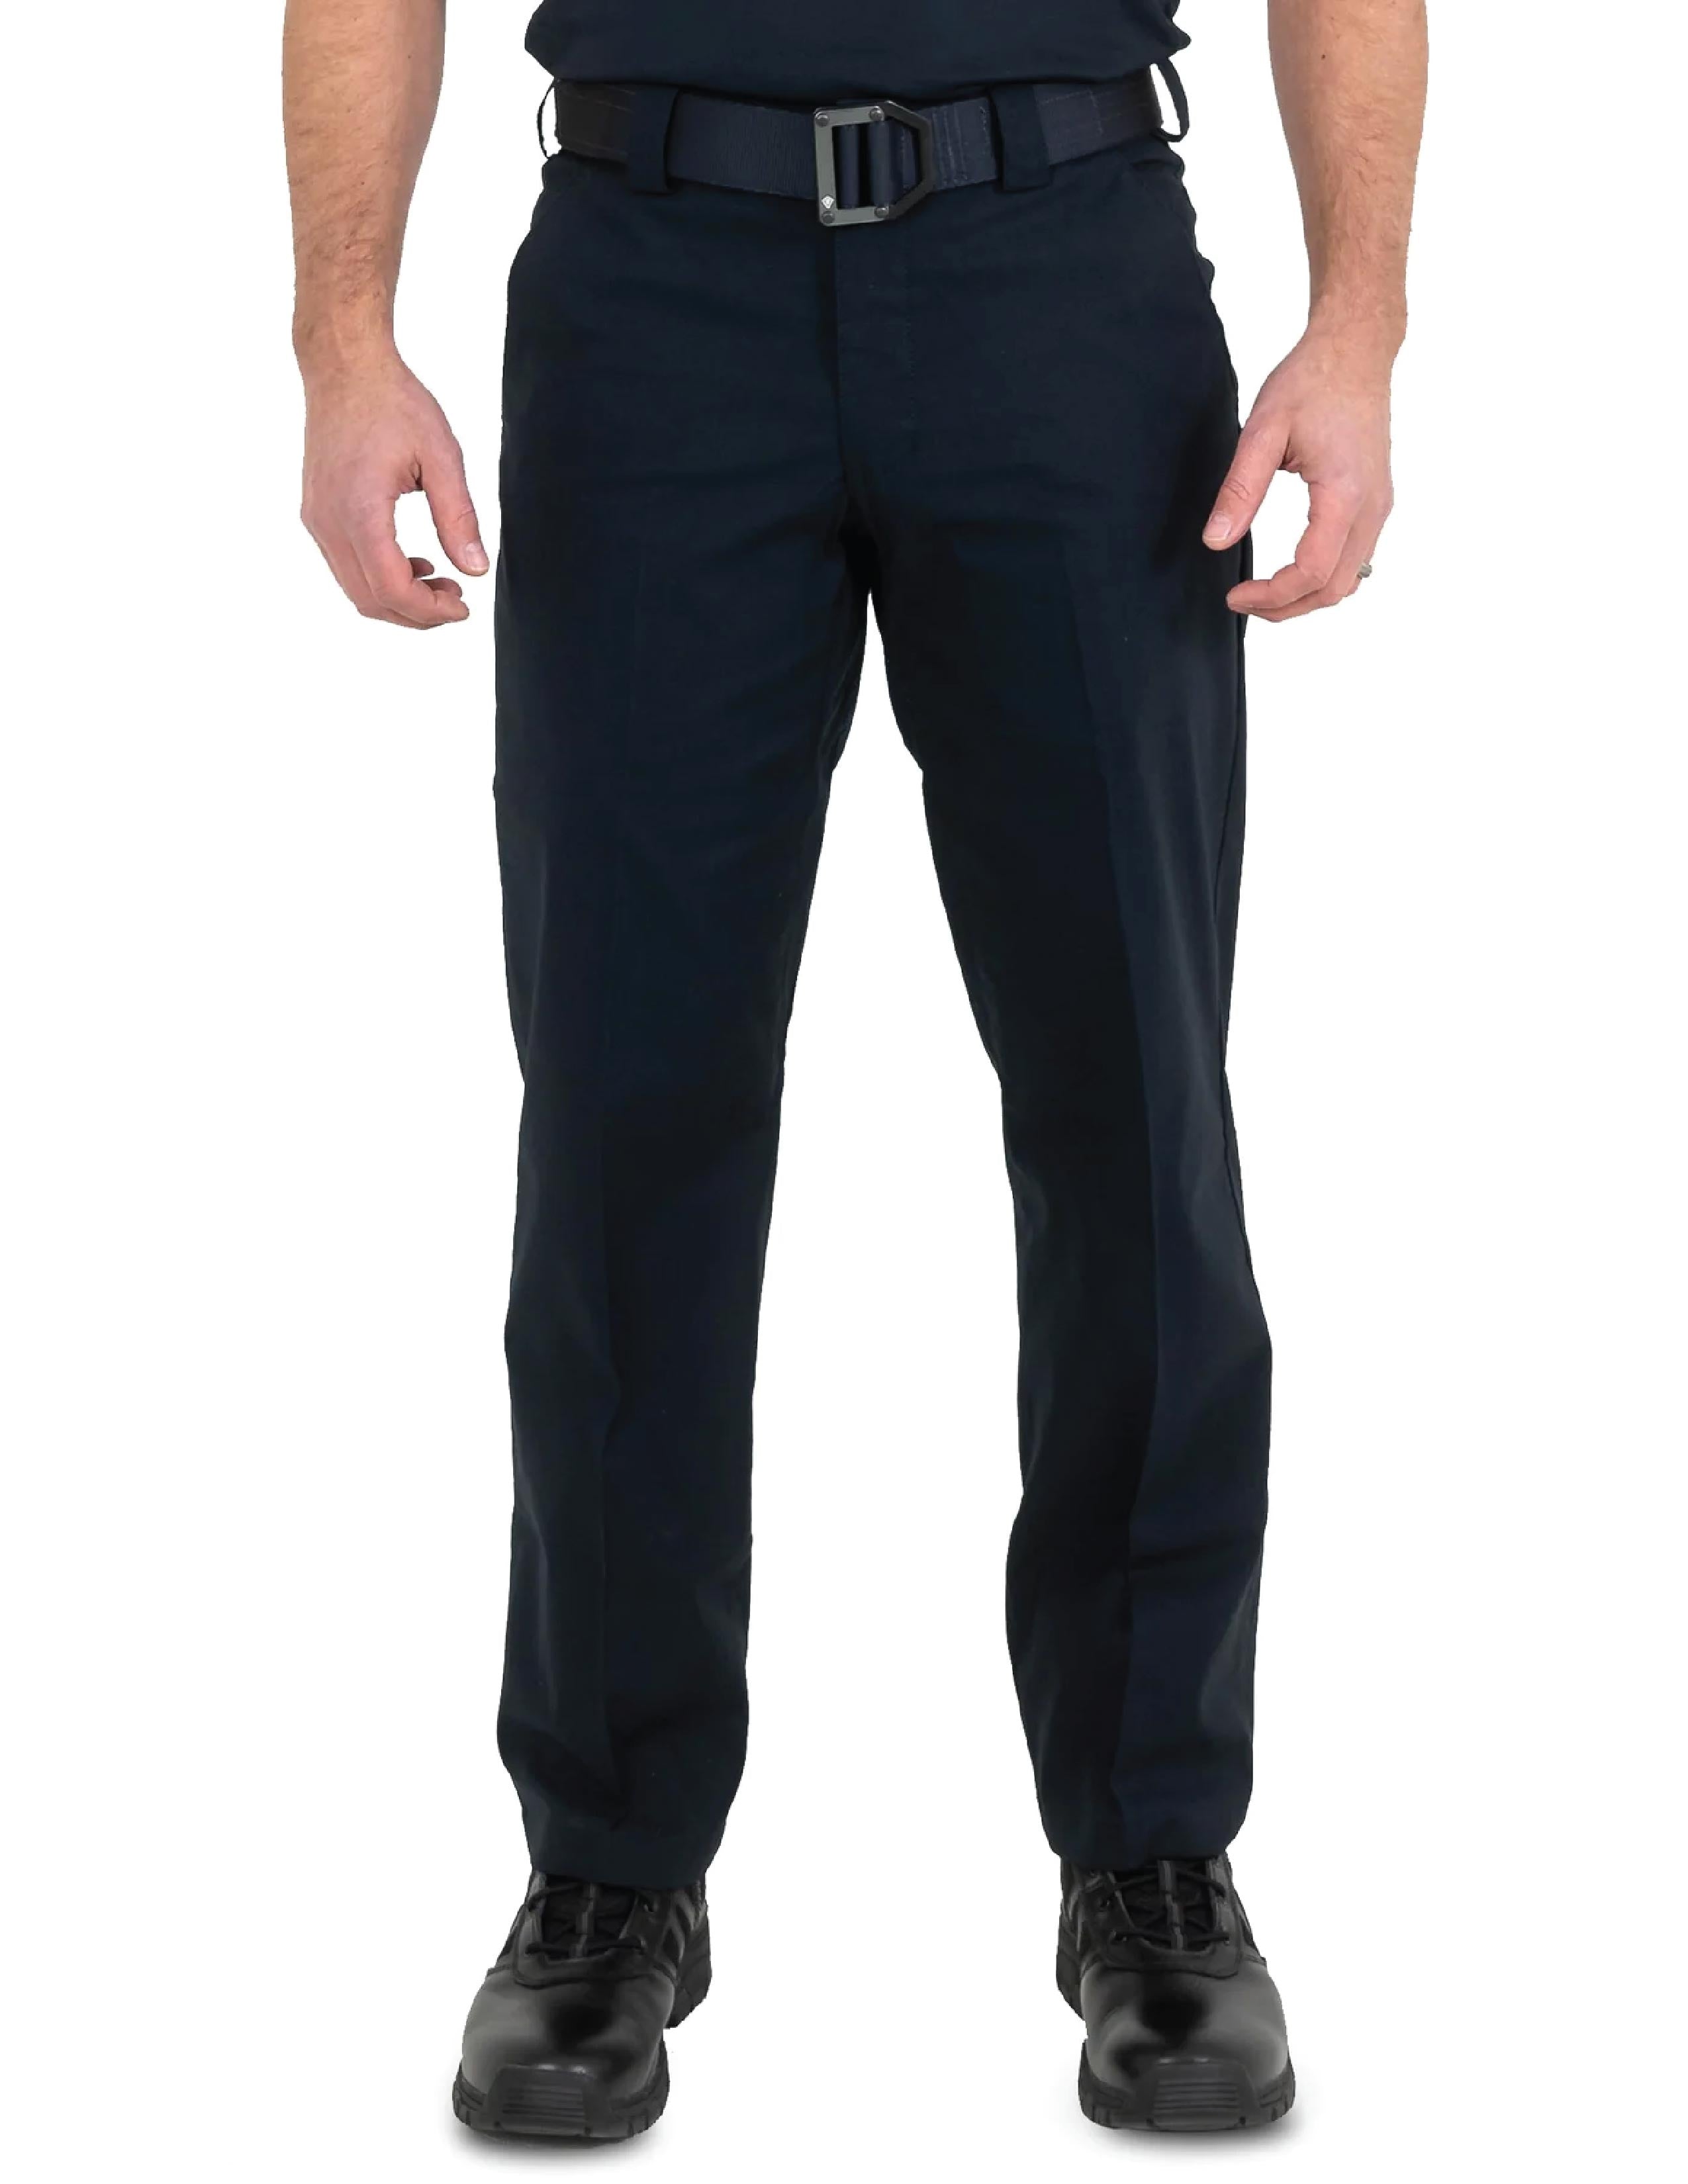 N) STYLE# 114018 MENS FIRST TACTICAL PRO DUTY UNIFORM PANT